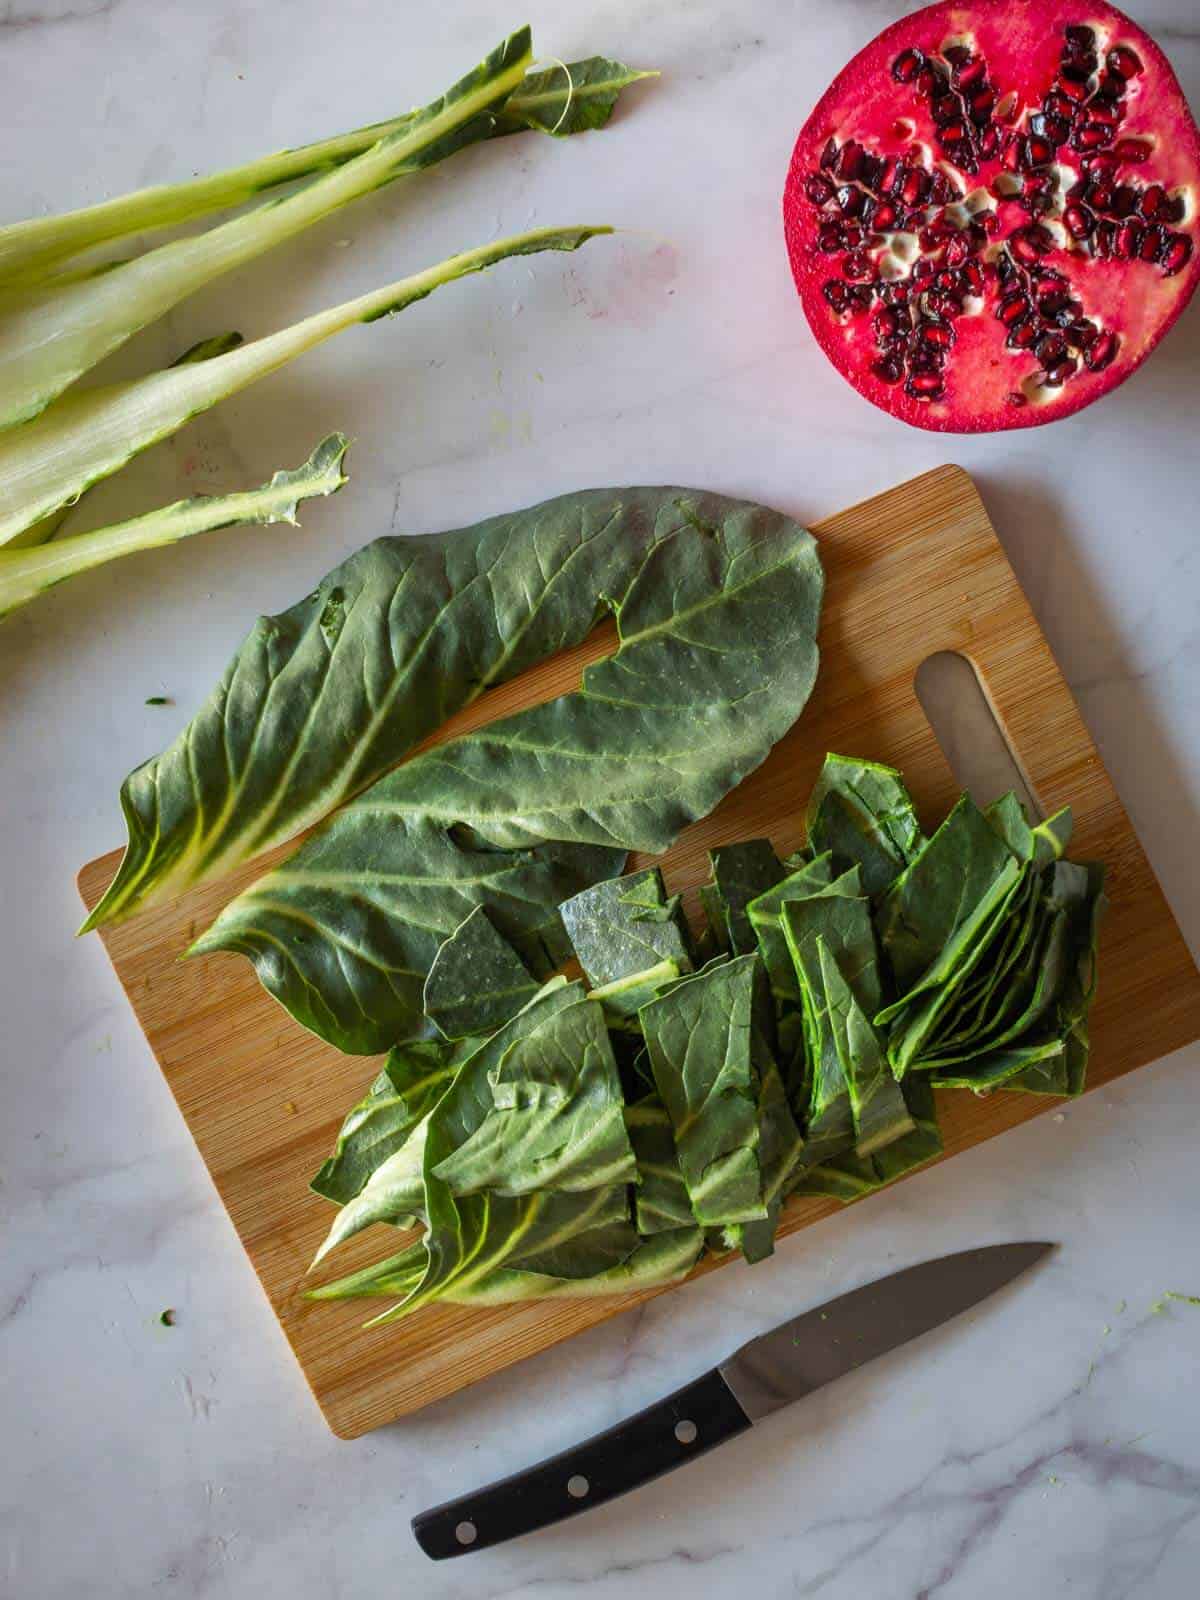 chop swiss chard leaves for Green Smoothie